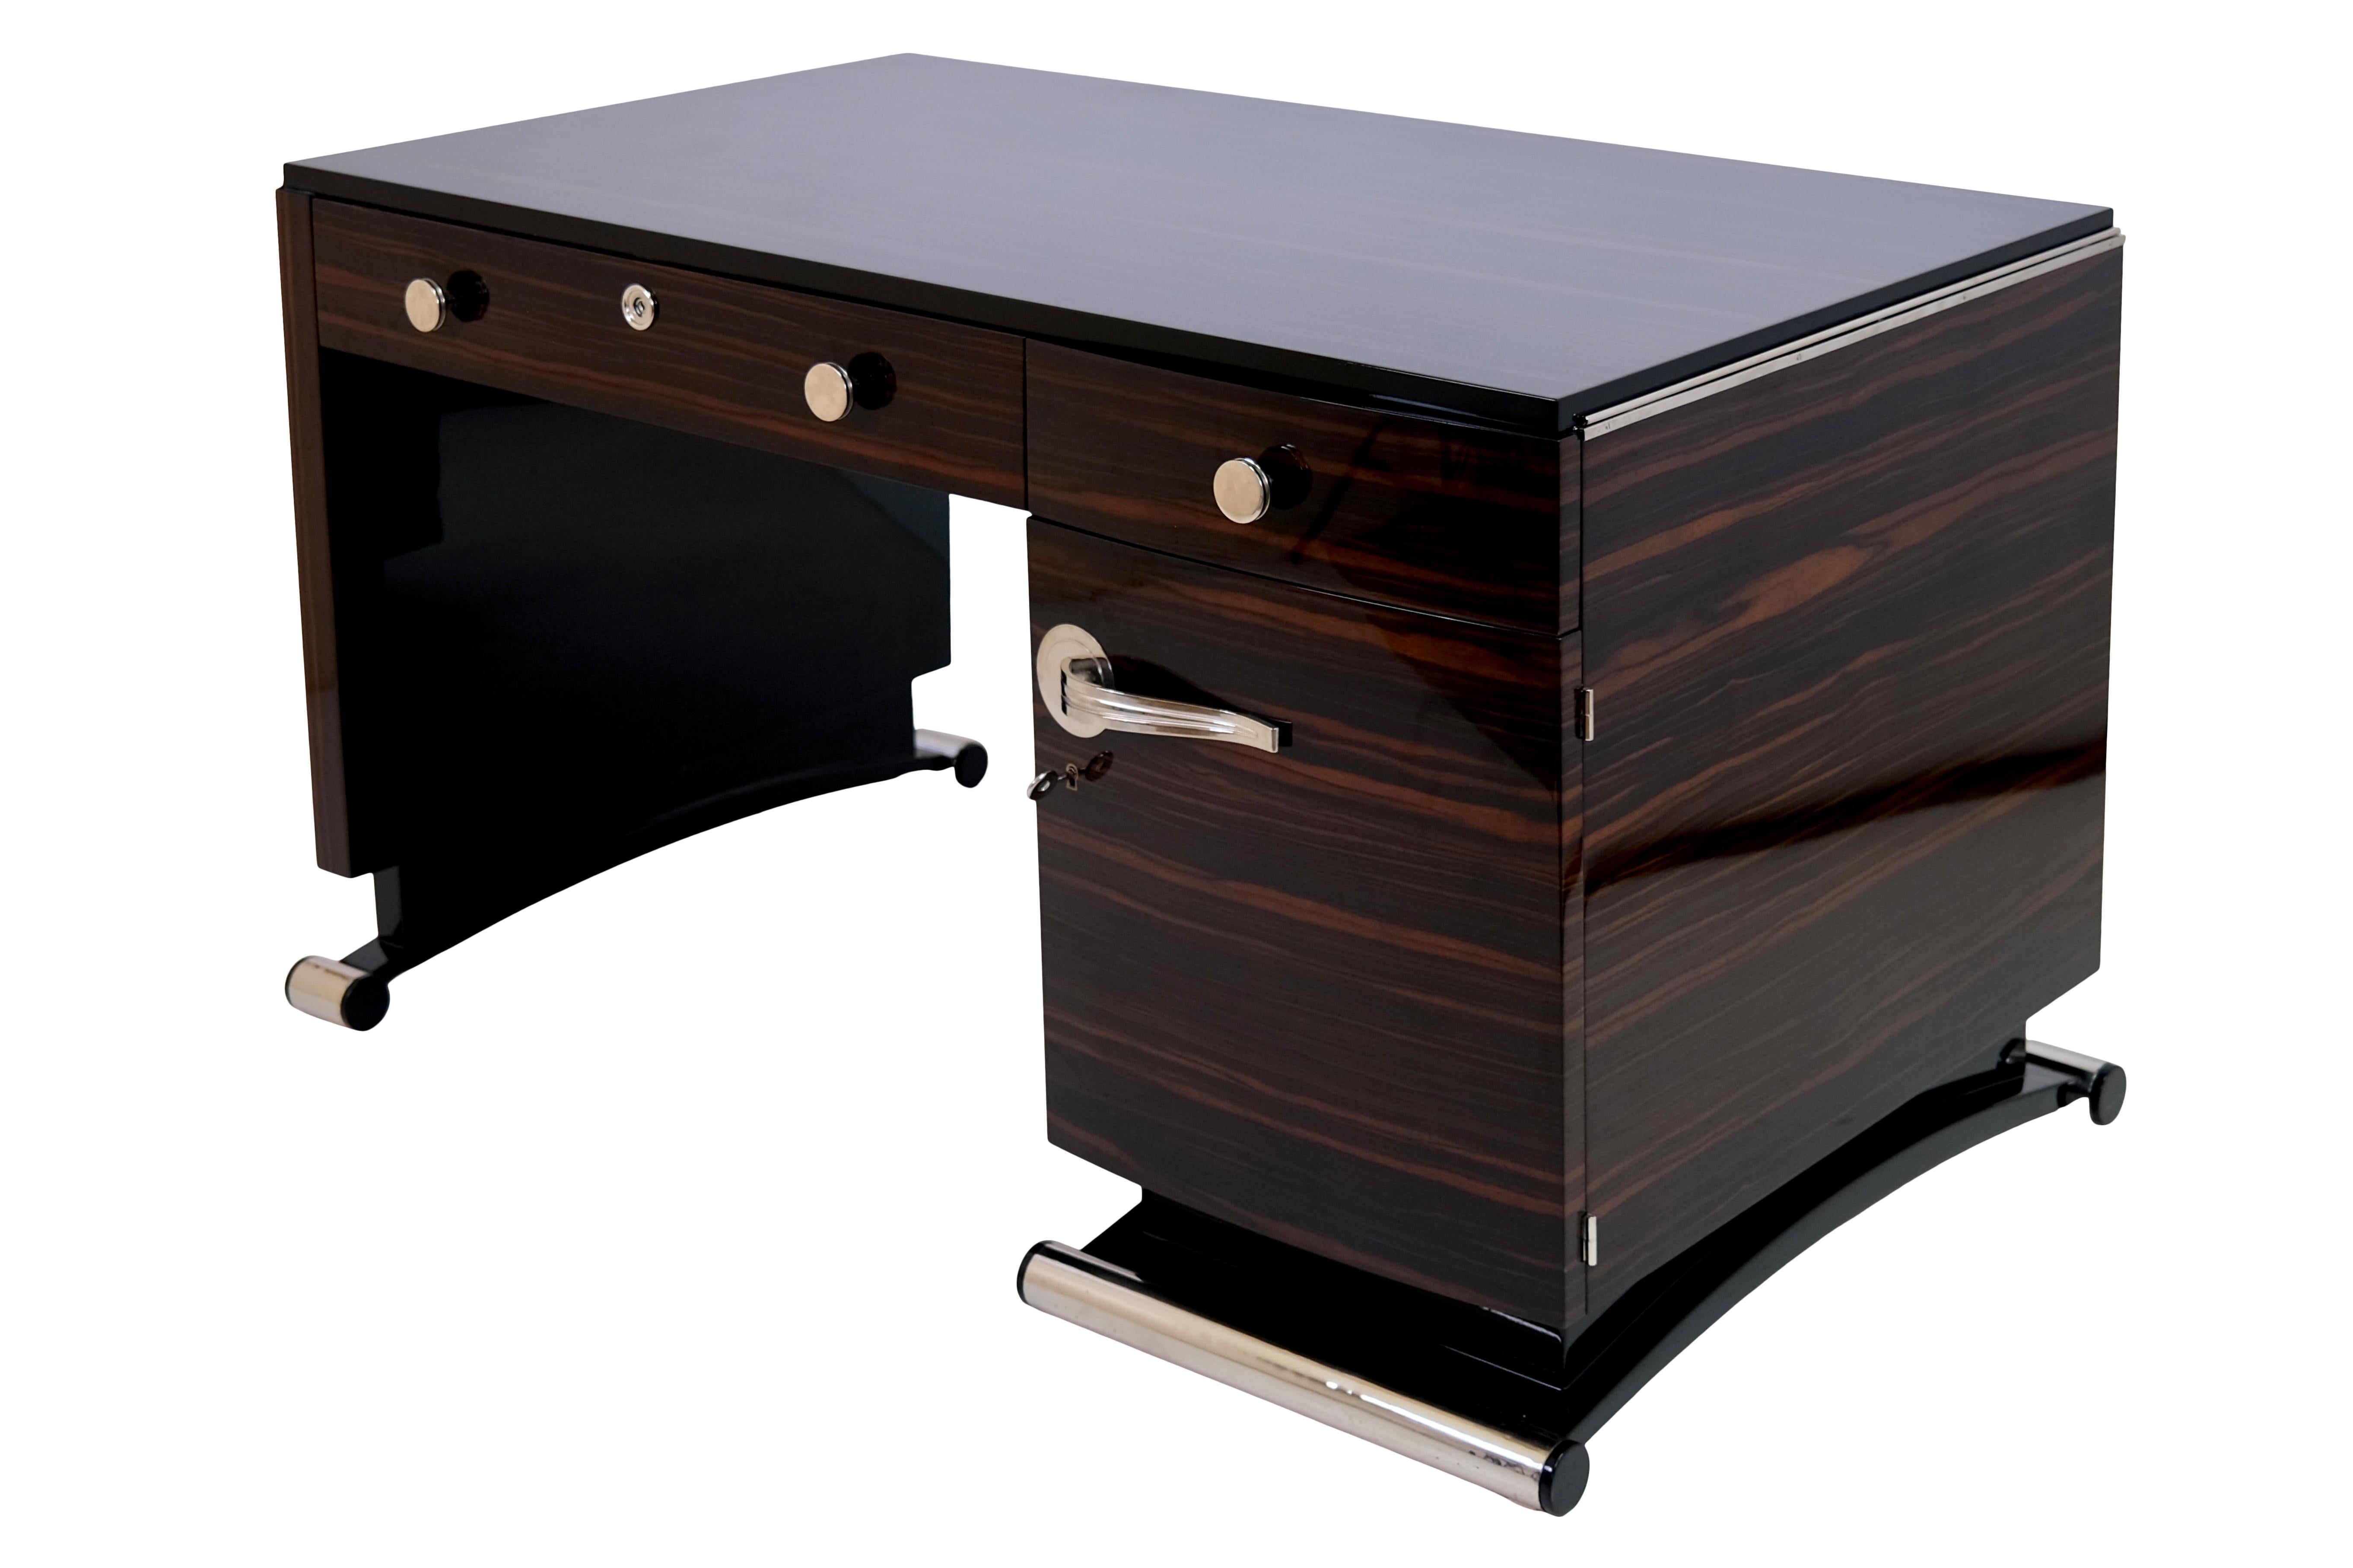 Blackened 1930's French Art Deco Desk on Curved Legs in Makassar with High Gloss Finish 